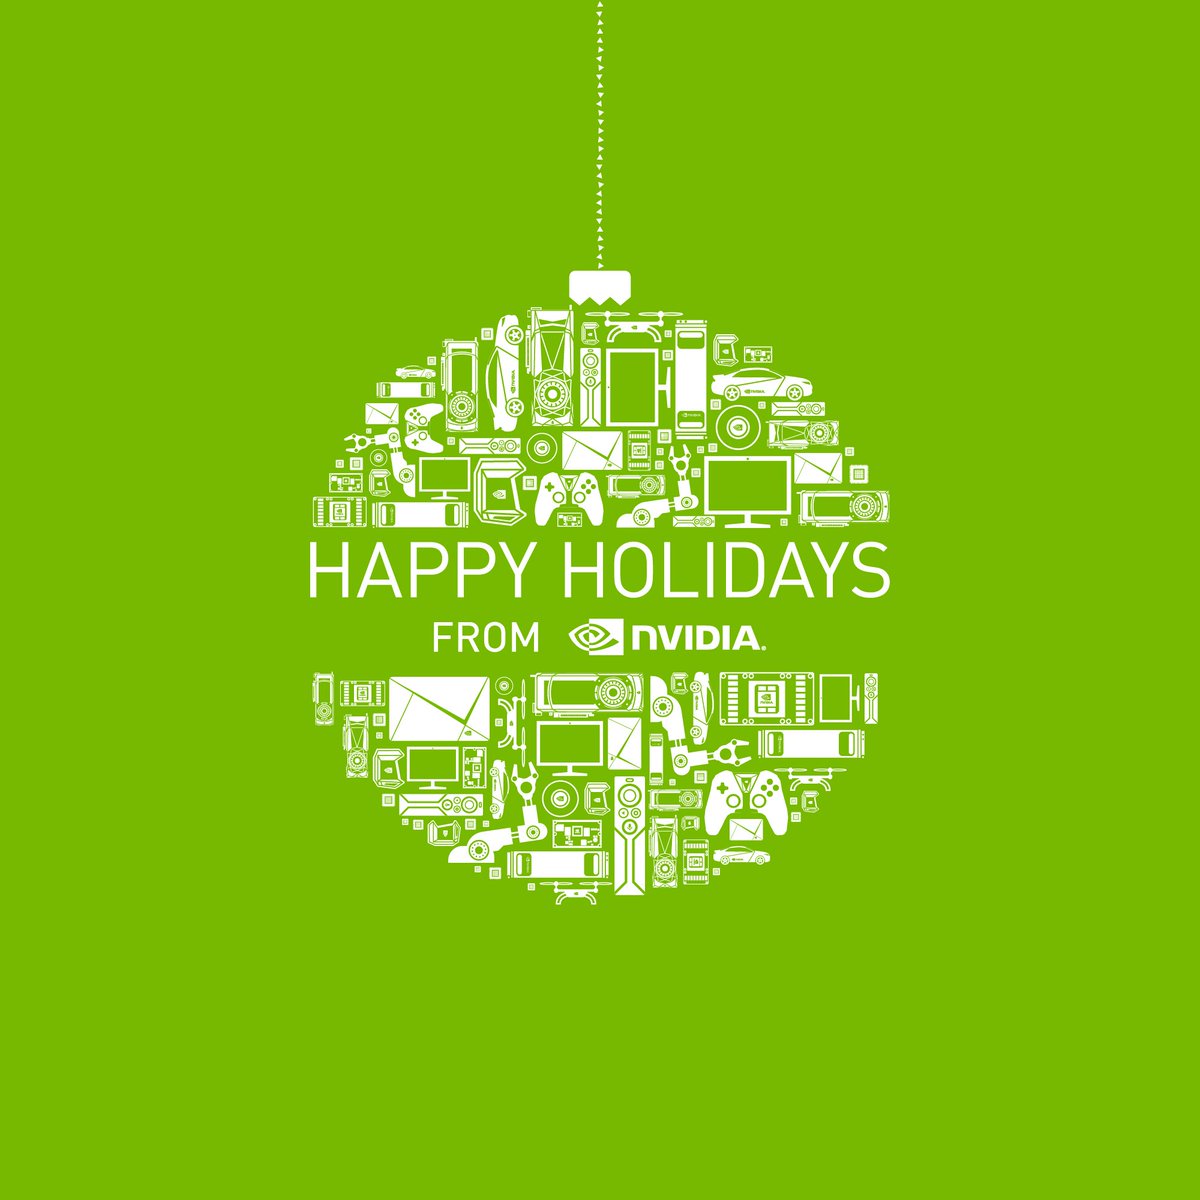 NVIDIA on Twitter "Wishing you the best in this holiday season HappyHolidays2017… "